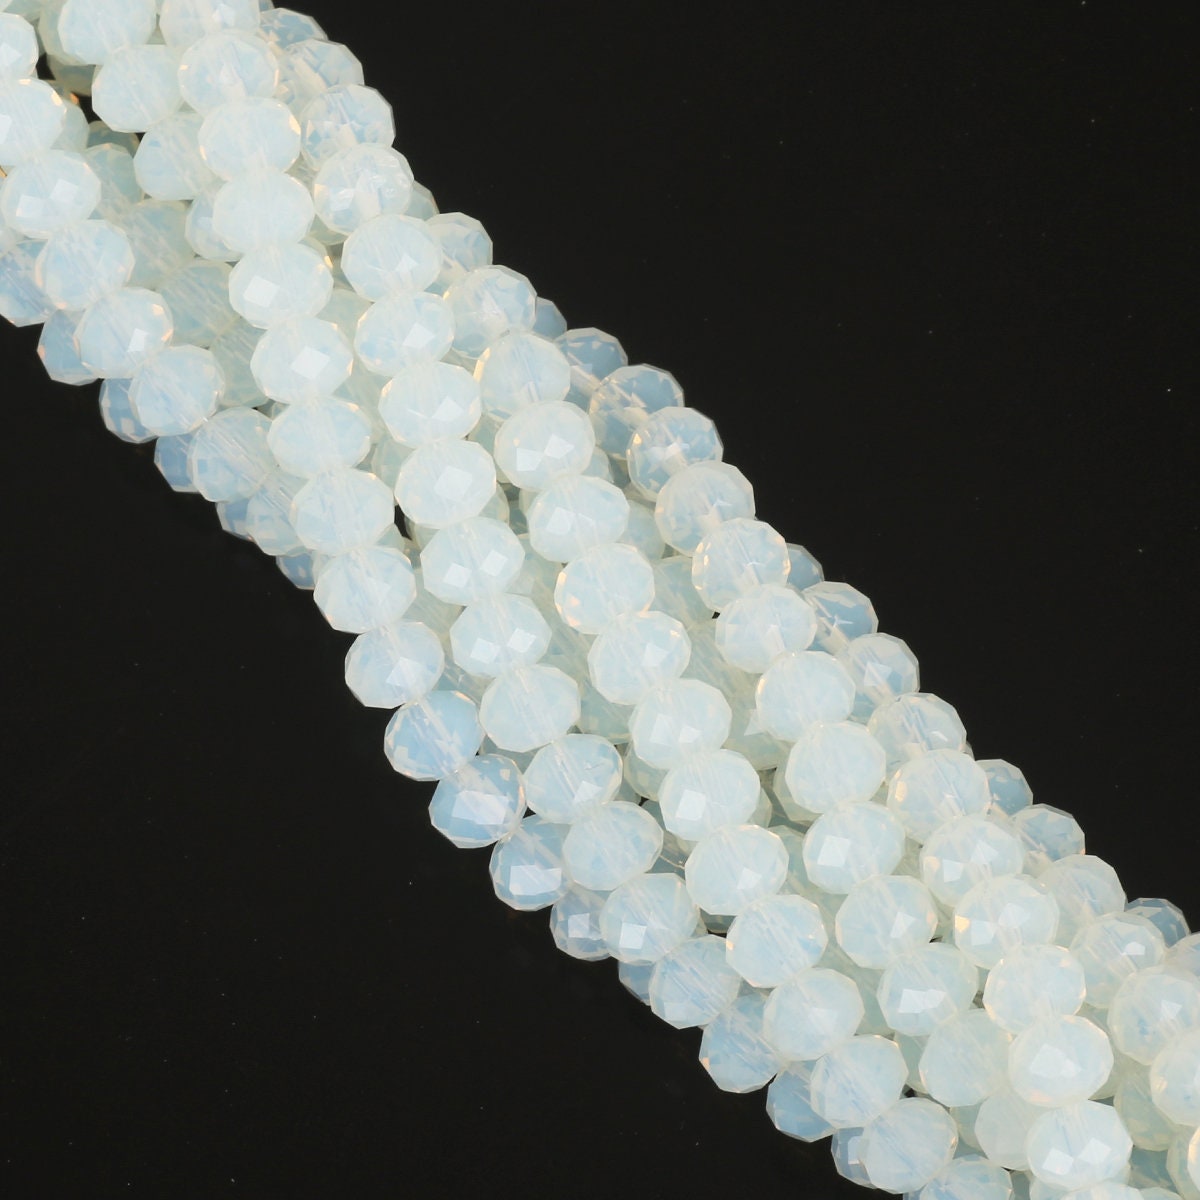 1mm/2mm/4mm/6mm/8mm Crystal Rondel Beads Faceted Glass Beads For